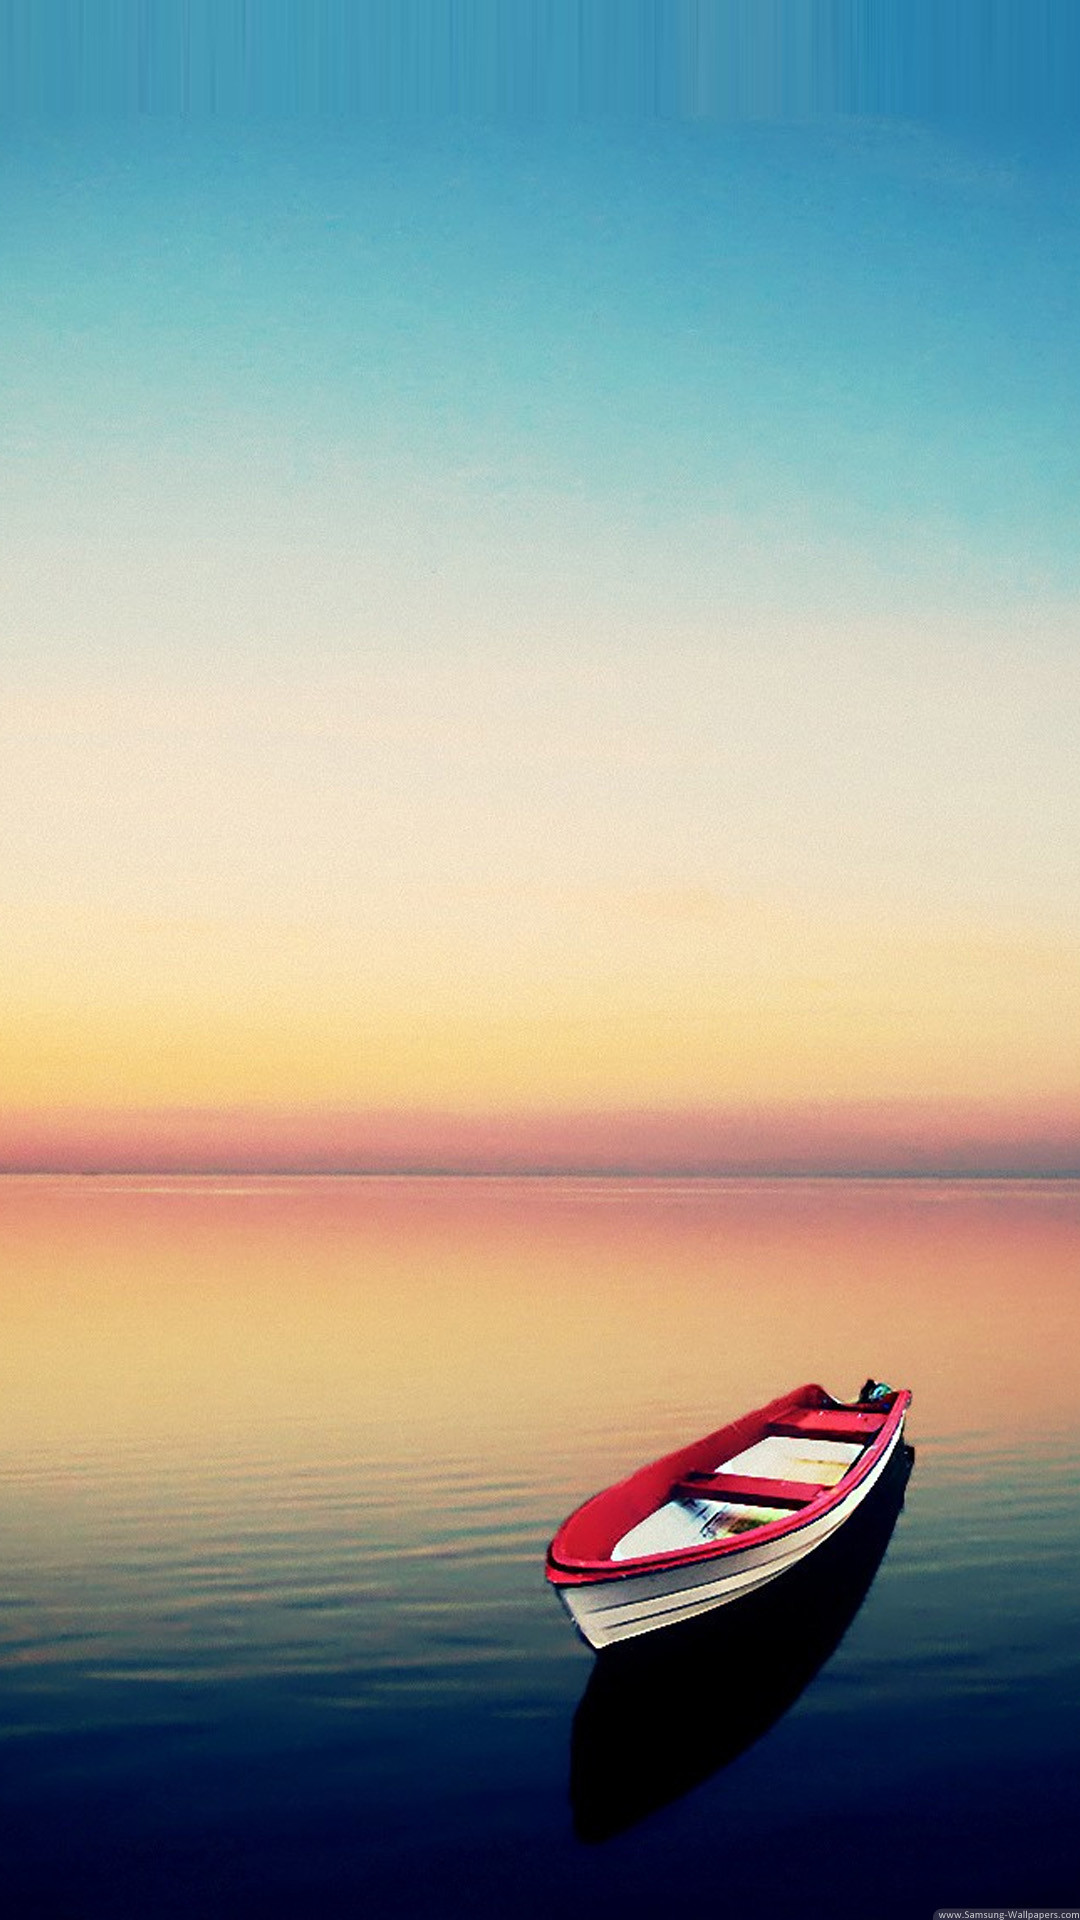 1080x1920 Boat at Sunset Smartphone HD Wallpapers â GetPhotos